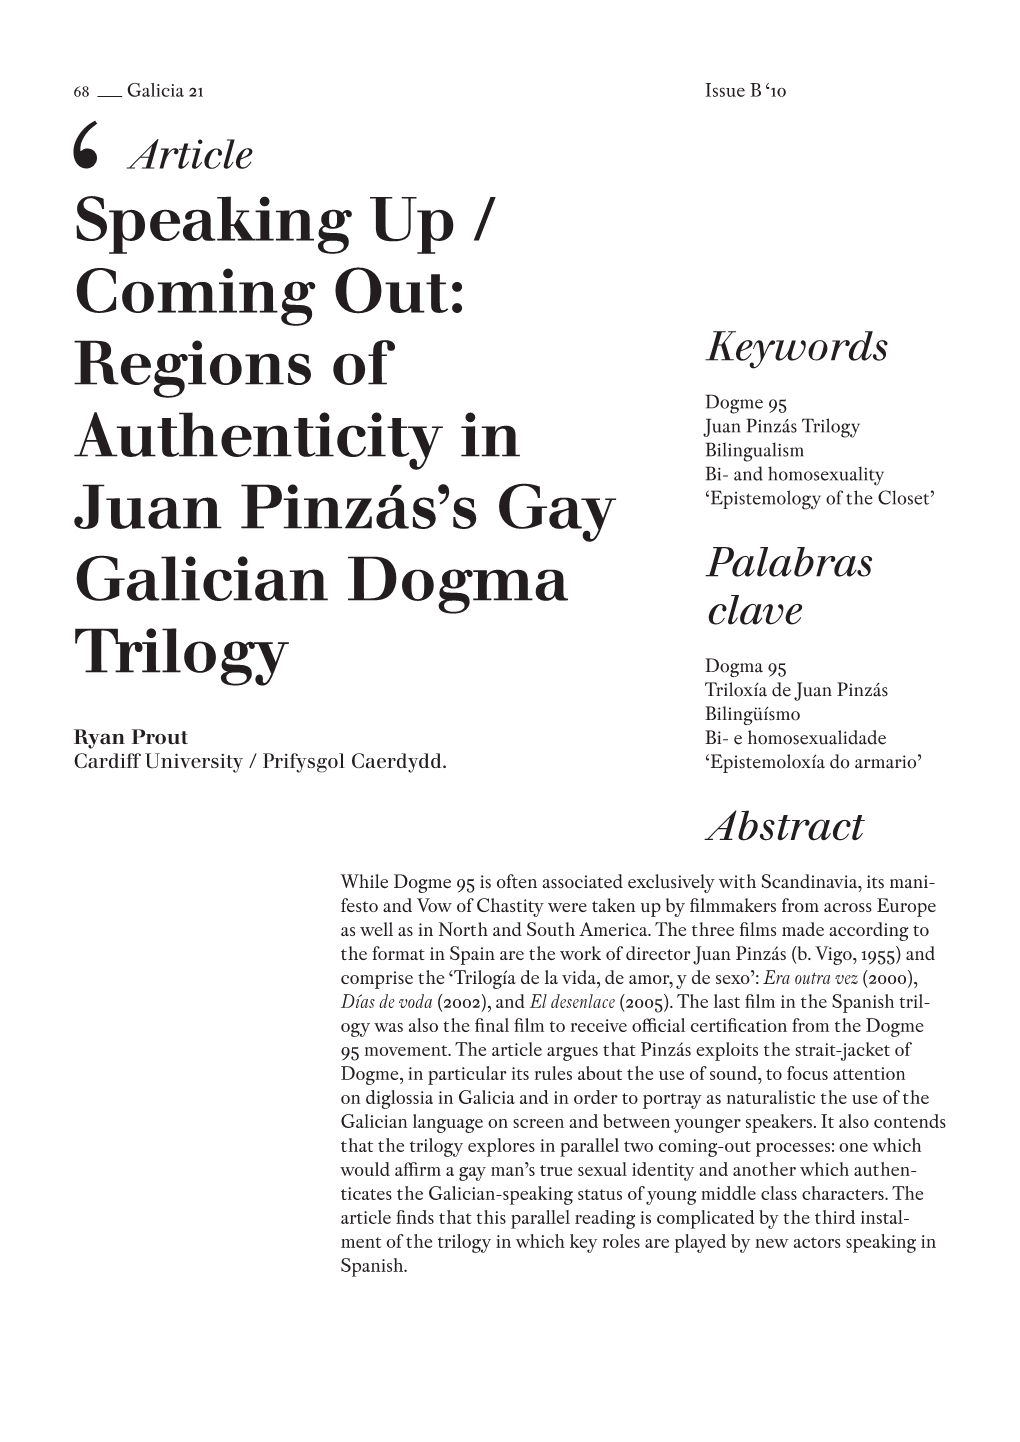 Speaking up / Coming Out: Regions of Authenticity in Juan Pinzás's Gay